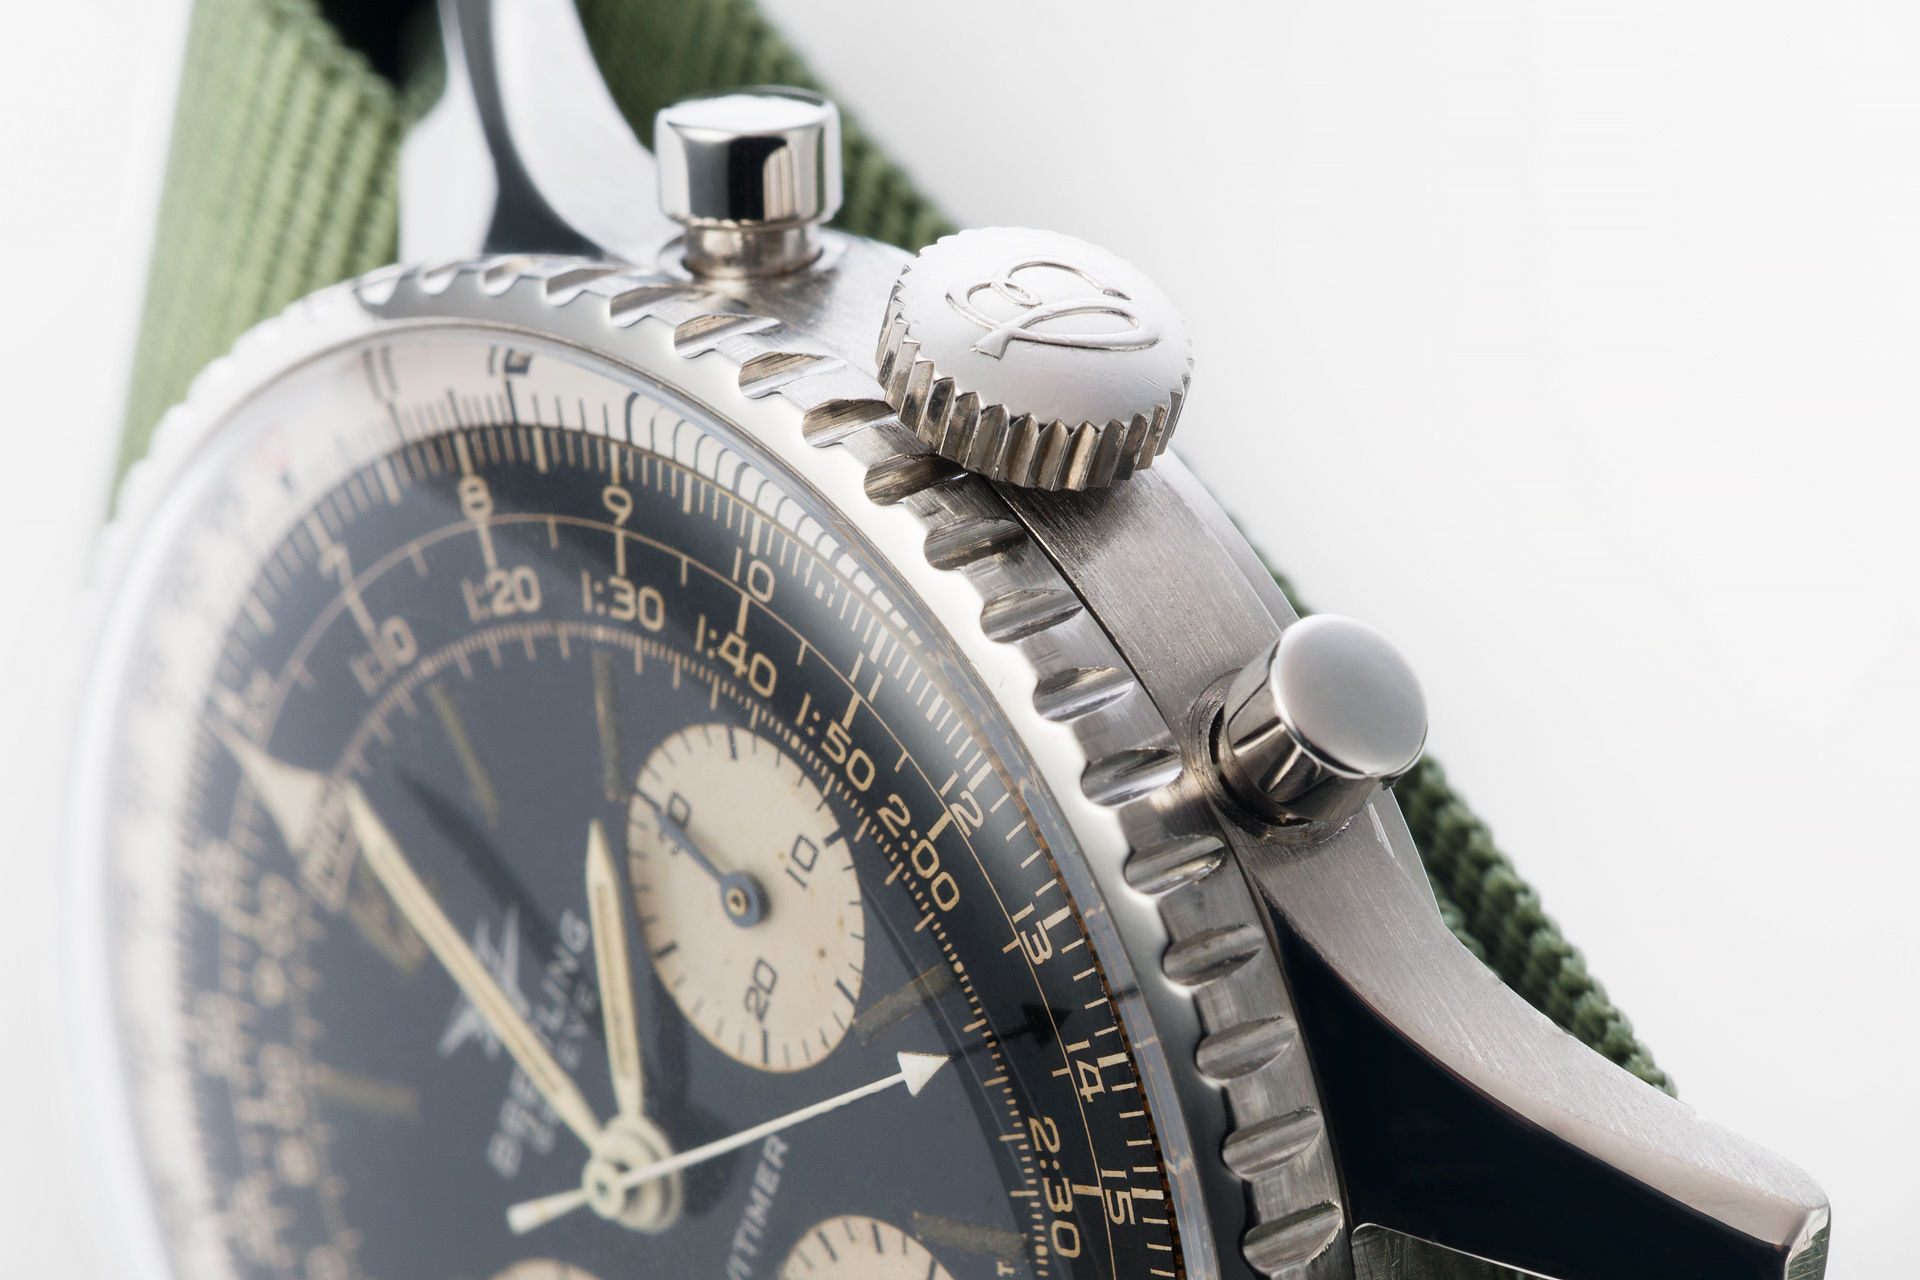 ref 806 | 'Twin Planes' from 1966 | Breitling Navitimer